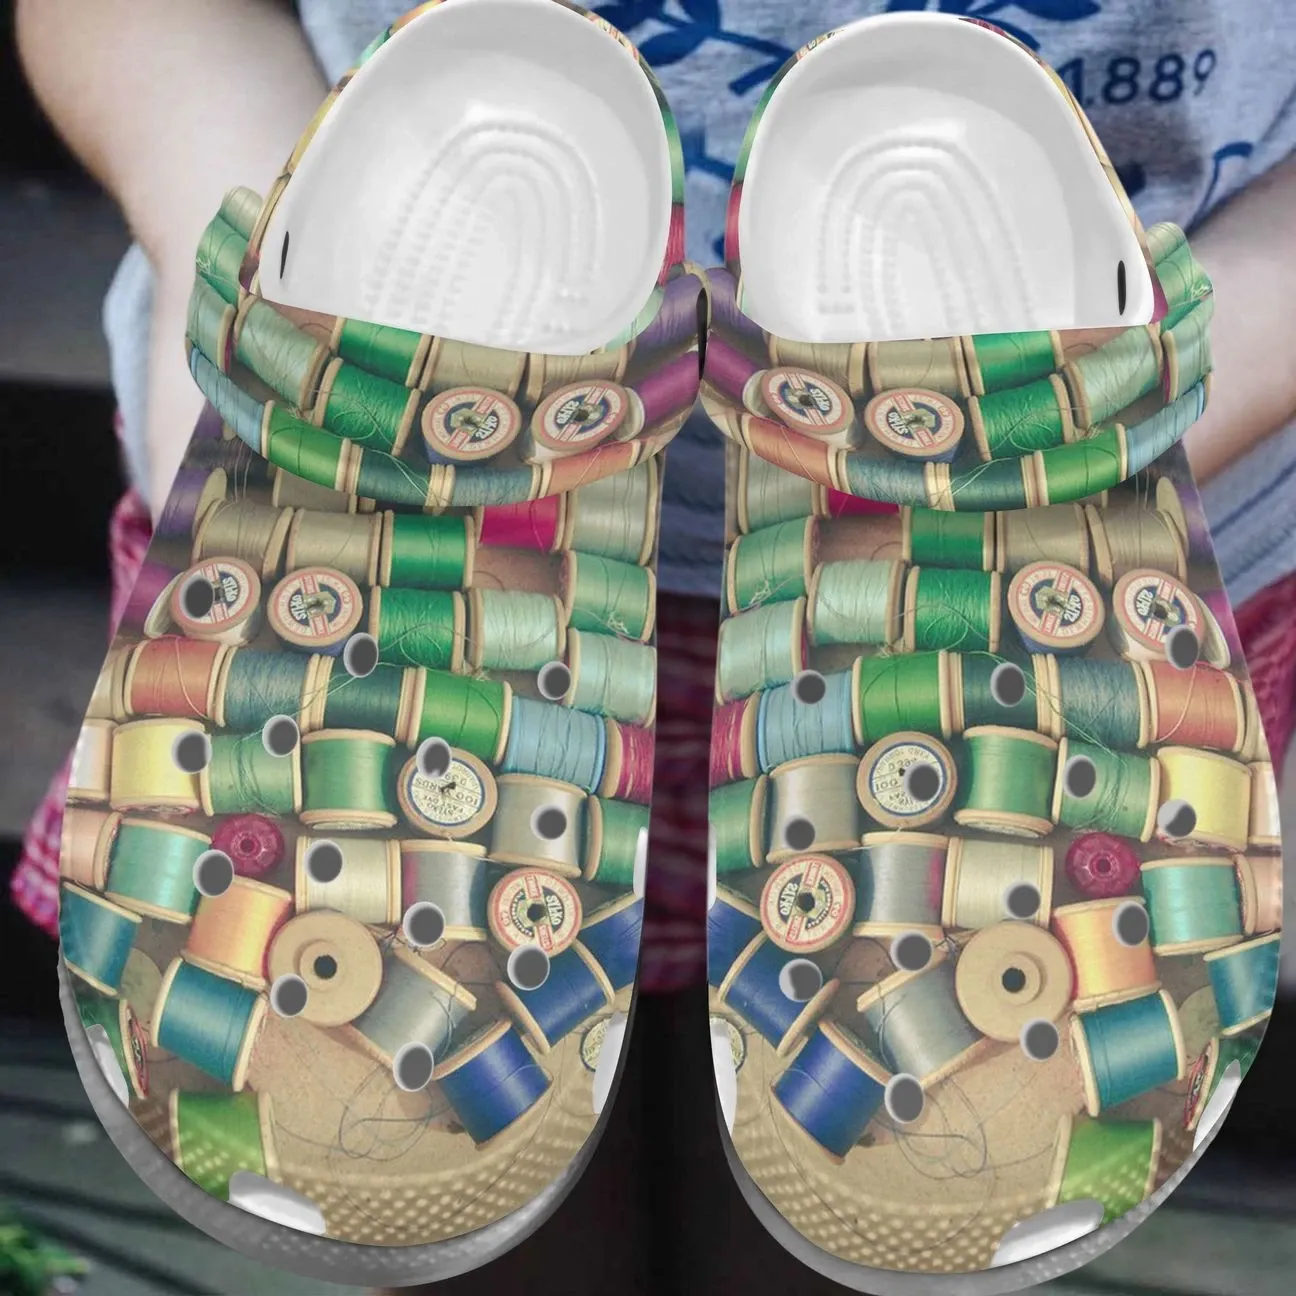 Sewing Personalize Clog Custom Crocs Fashionstyle Comfortable For Women Men Kid Print 3D Colorful Cotton Reels